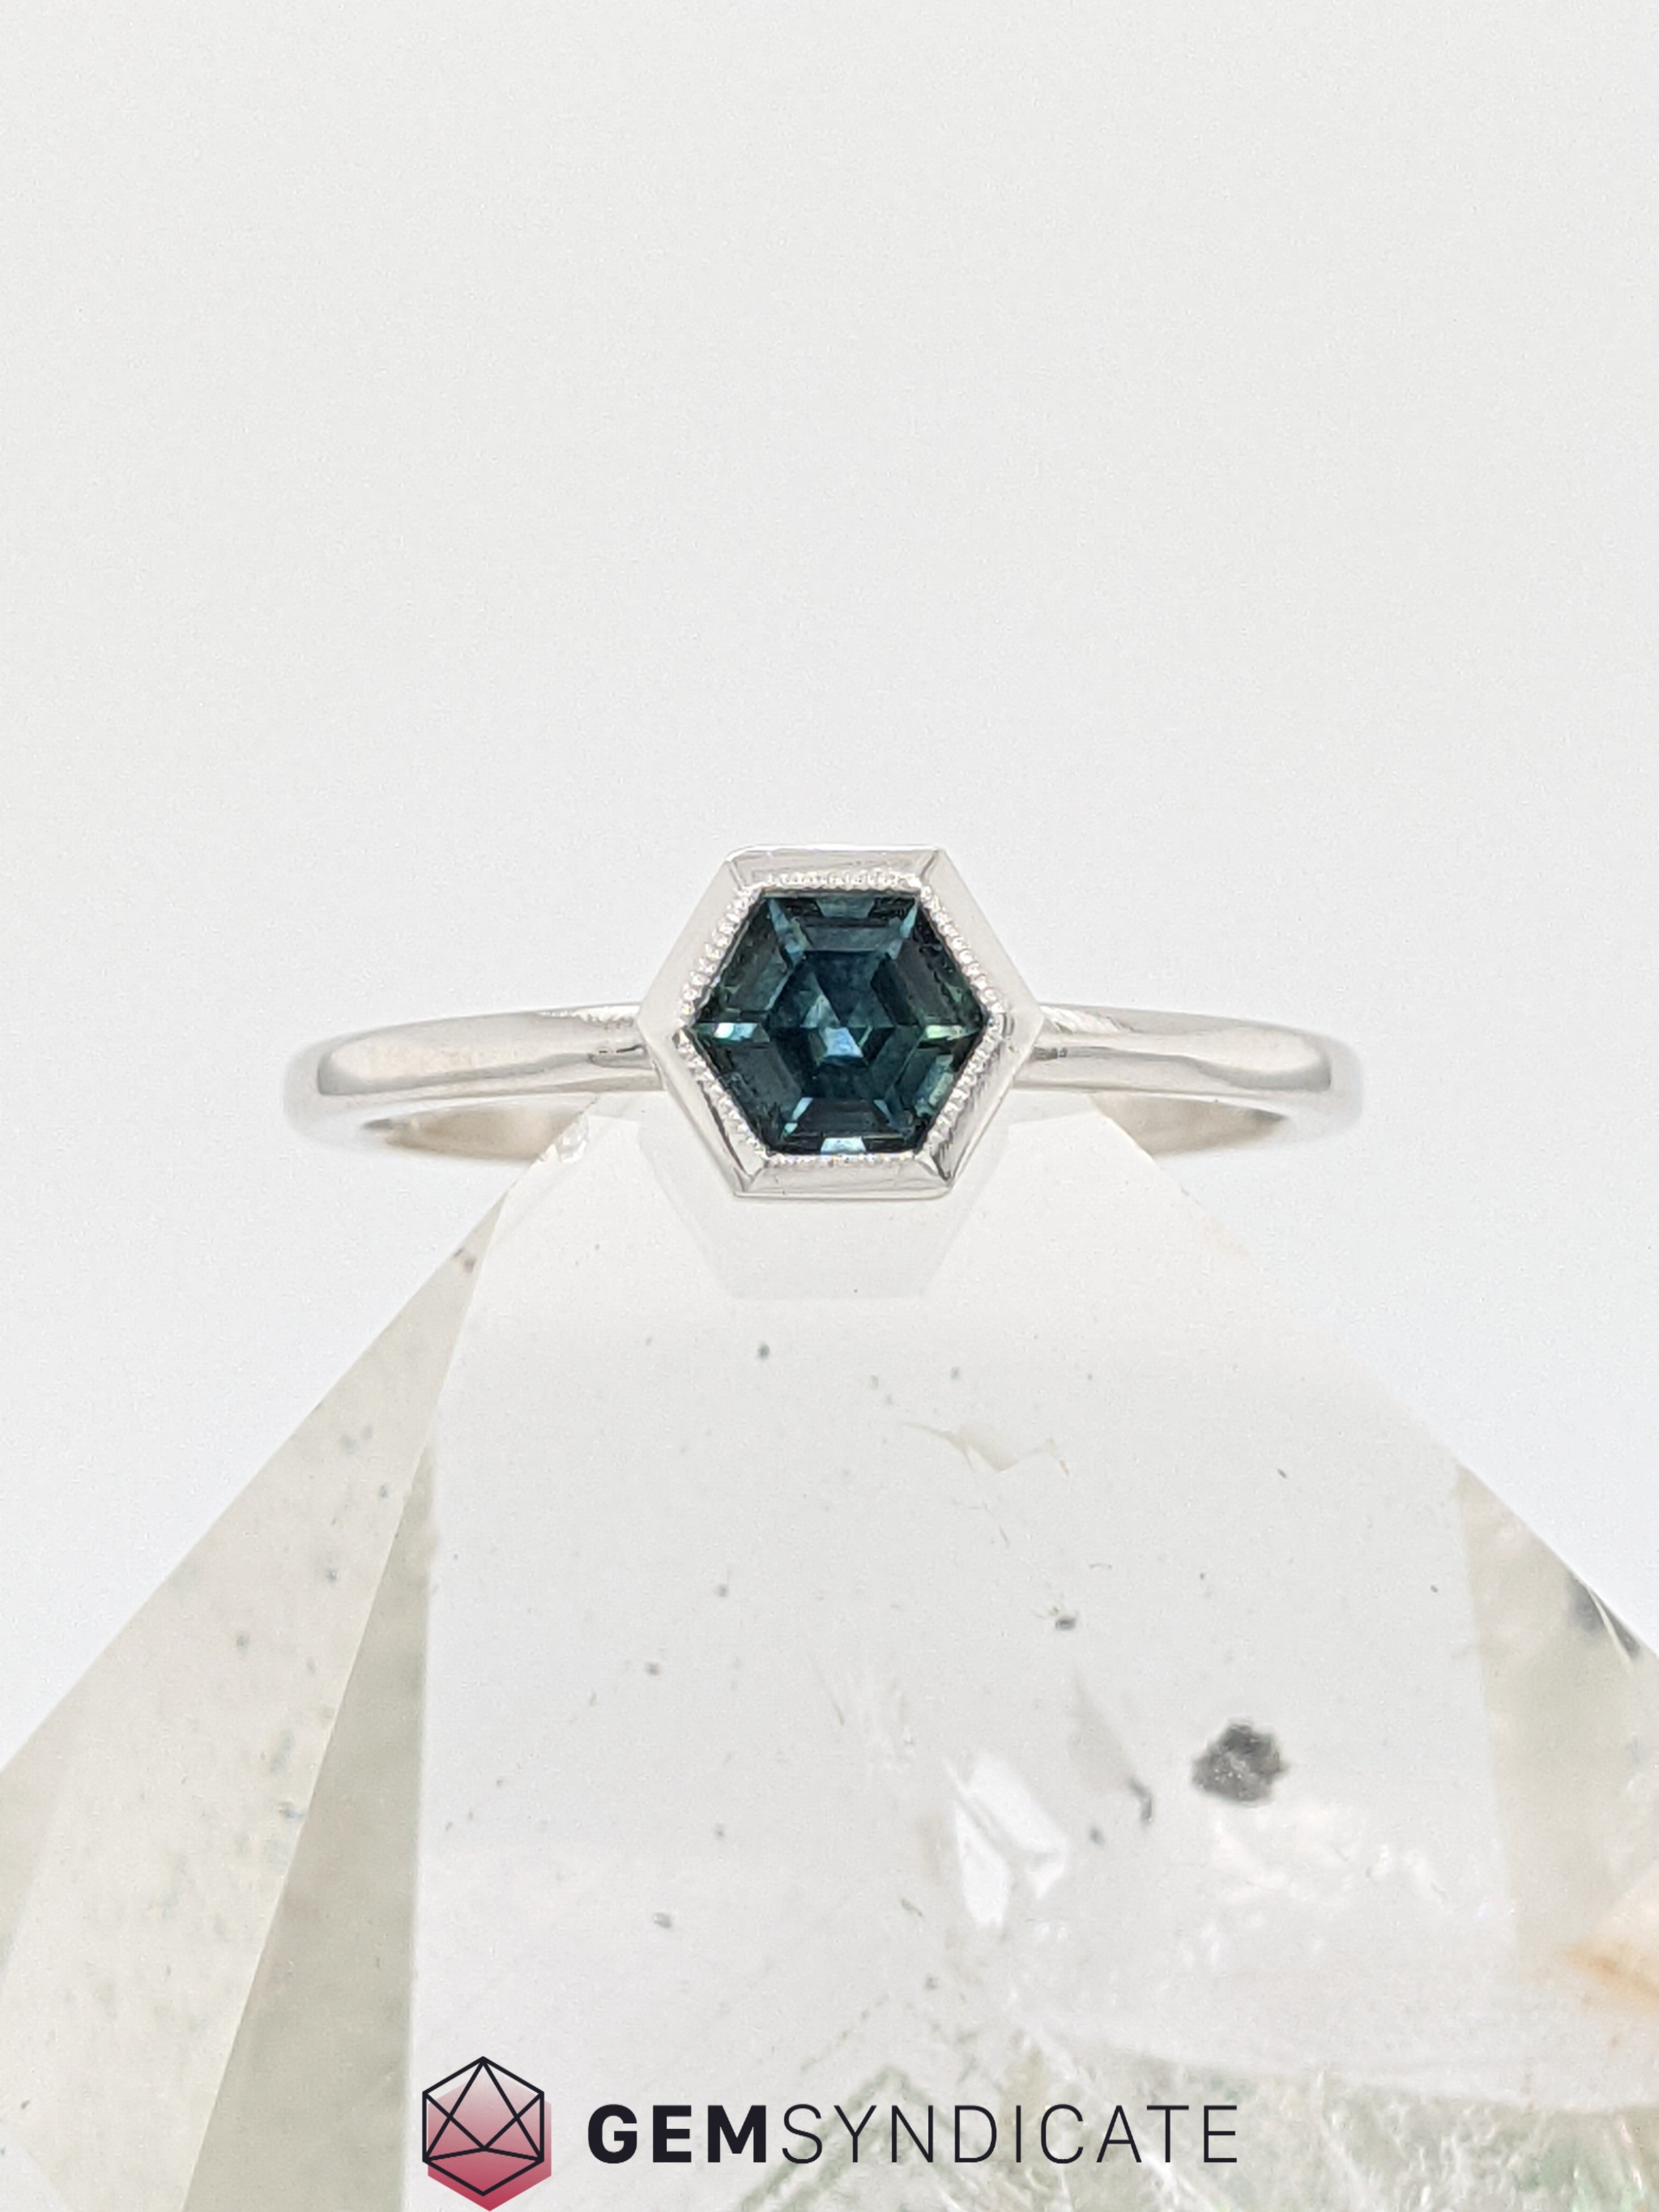 Contemporary Montana Teal Sapphire Ring in 14k White Gold